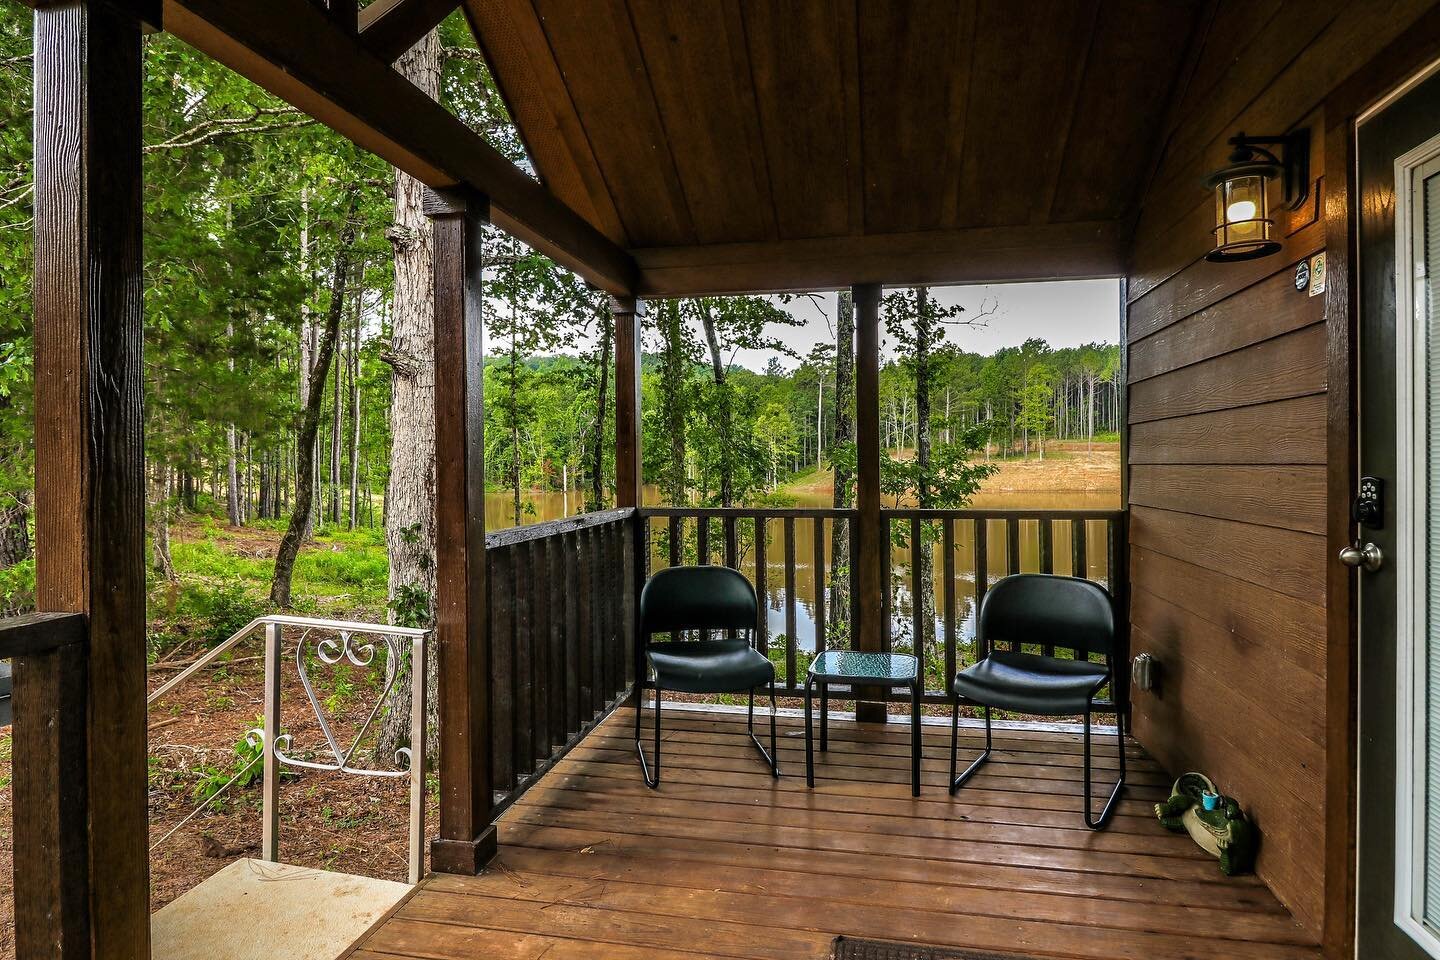 Keep us in mind this summer as you plan your getaways! We have 5 cabins &amp; 2 campers plus plenty of fish in our pond. We also offer discounts for weekly, monthly, and extended stays if you are in between houses or working remotely!
#easttexas #bar